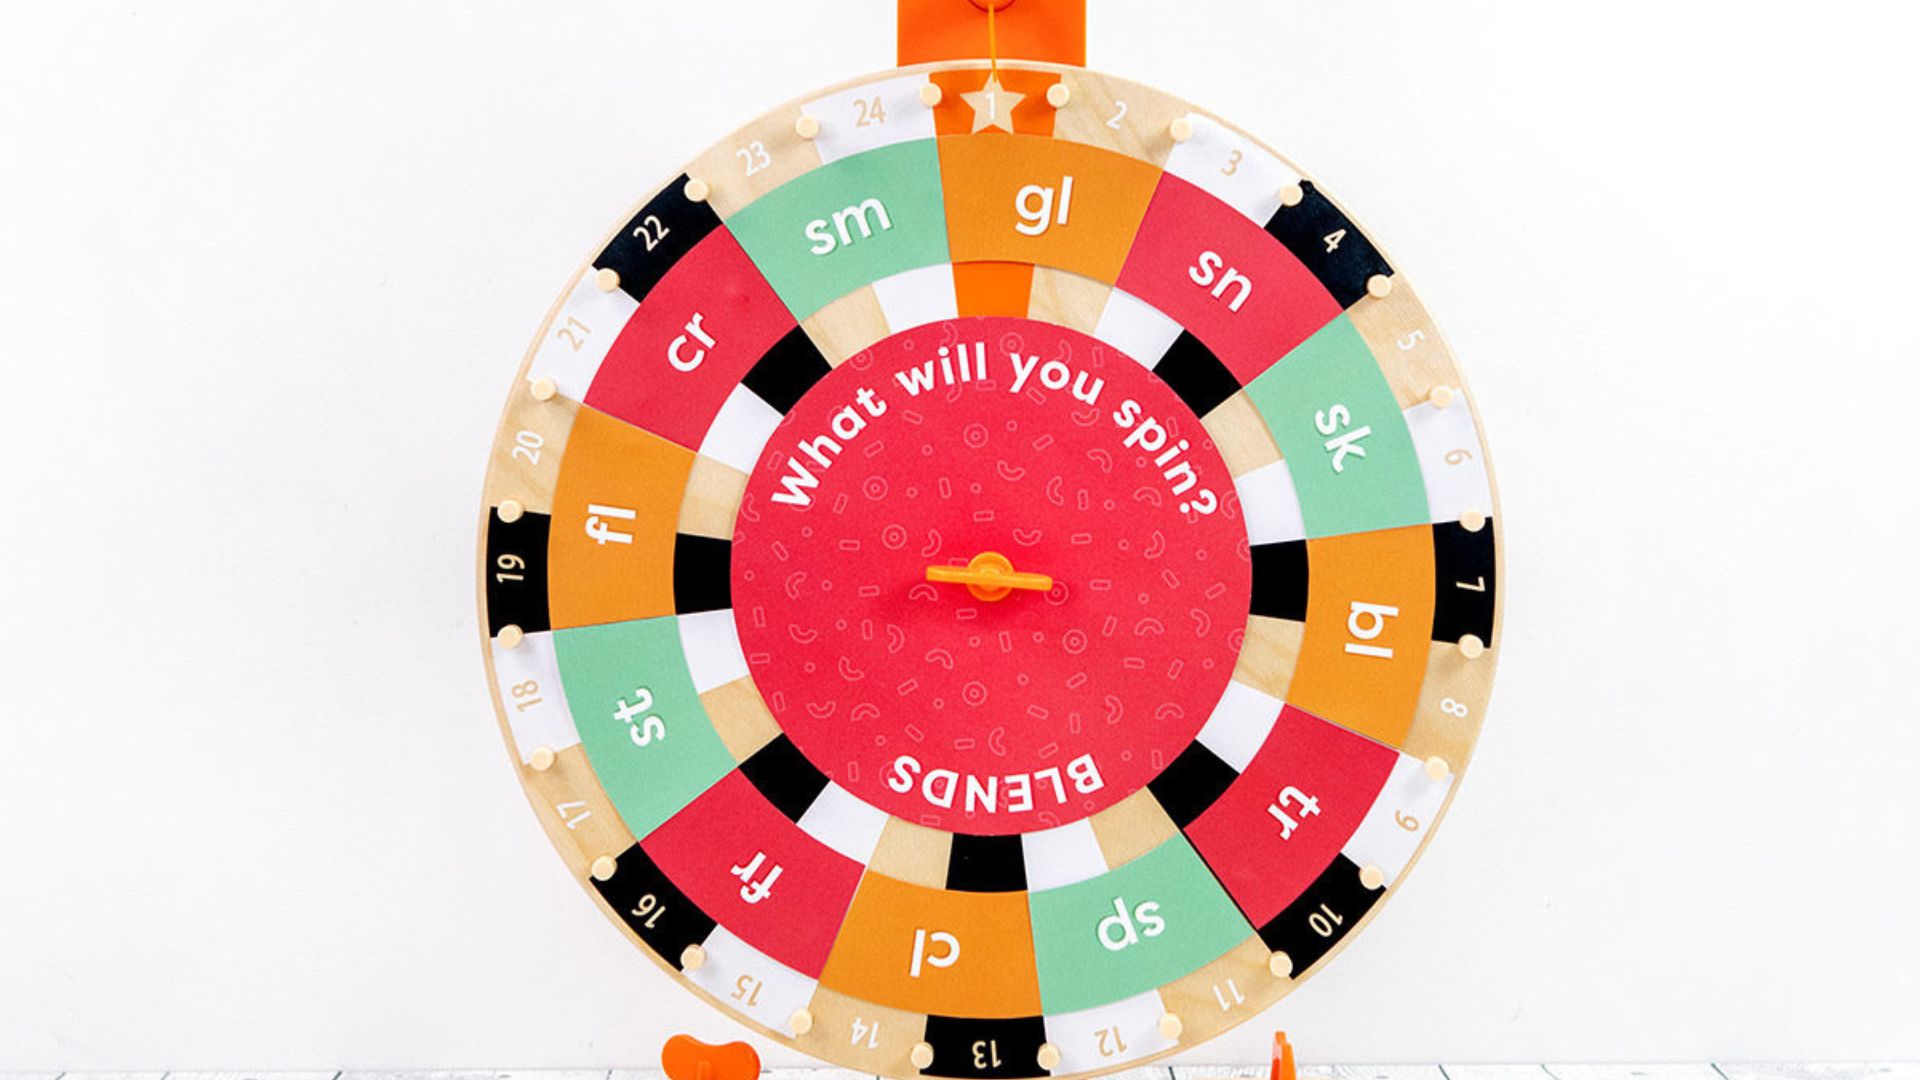 this image shows Spin Wheel for Classroom Review Games